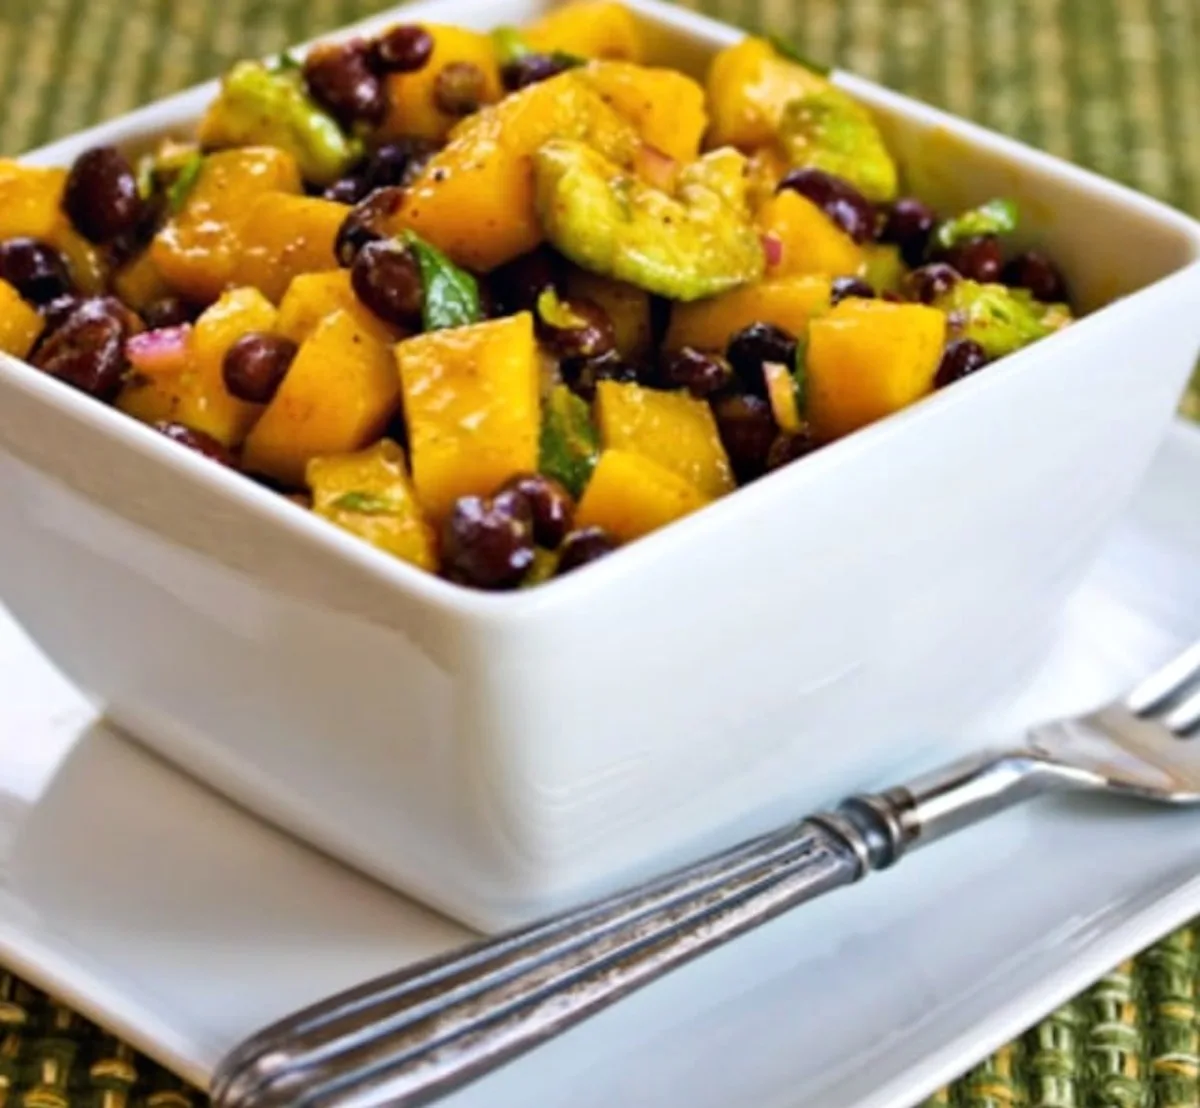 Mango salad with beans, avocado and mint